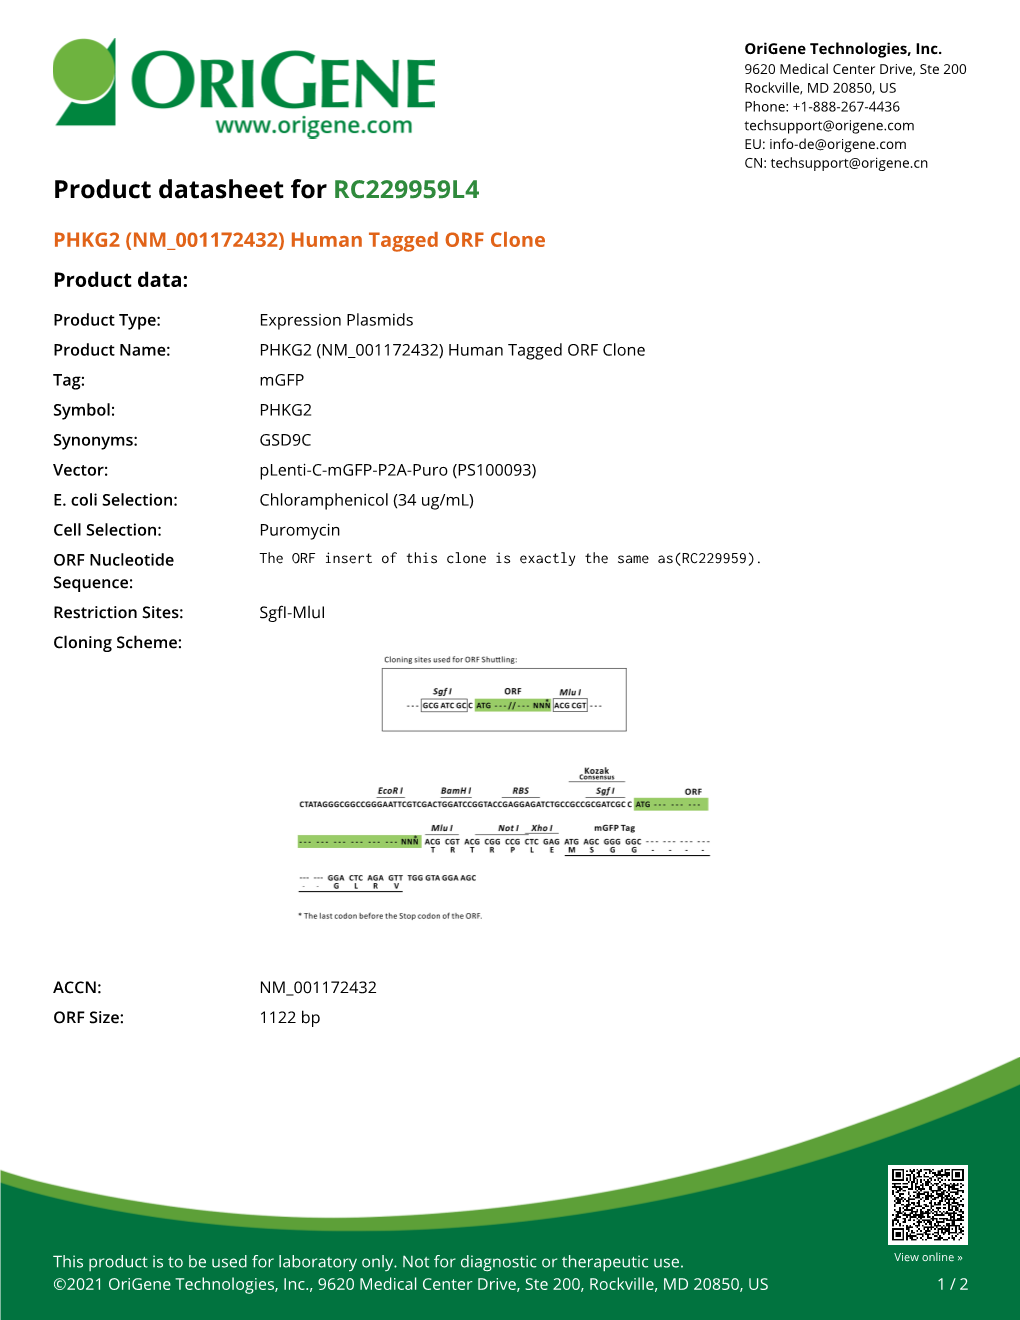 PHKG2 (NM 001172432) Human Tagged ORF Clone Product Data